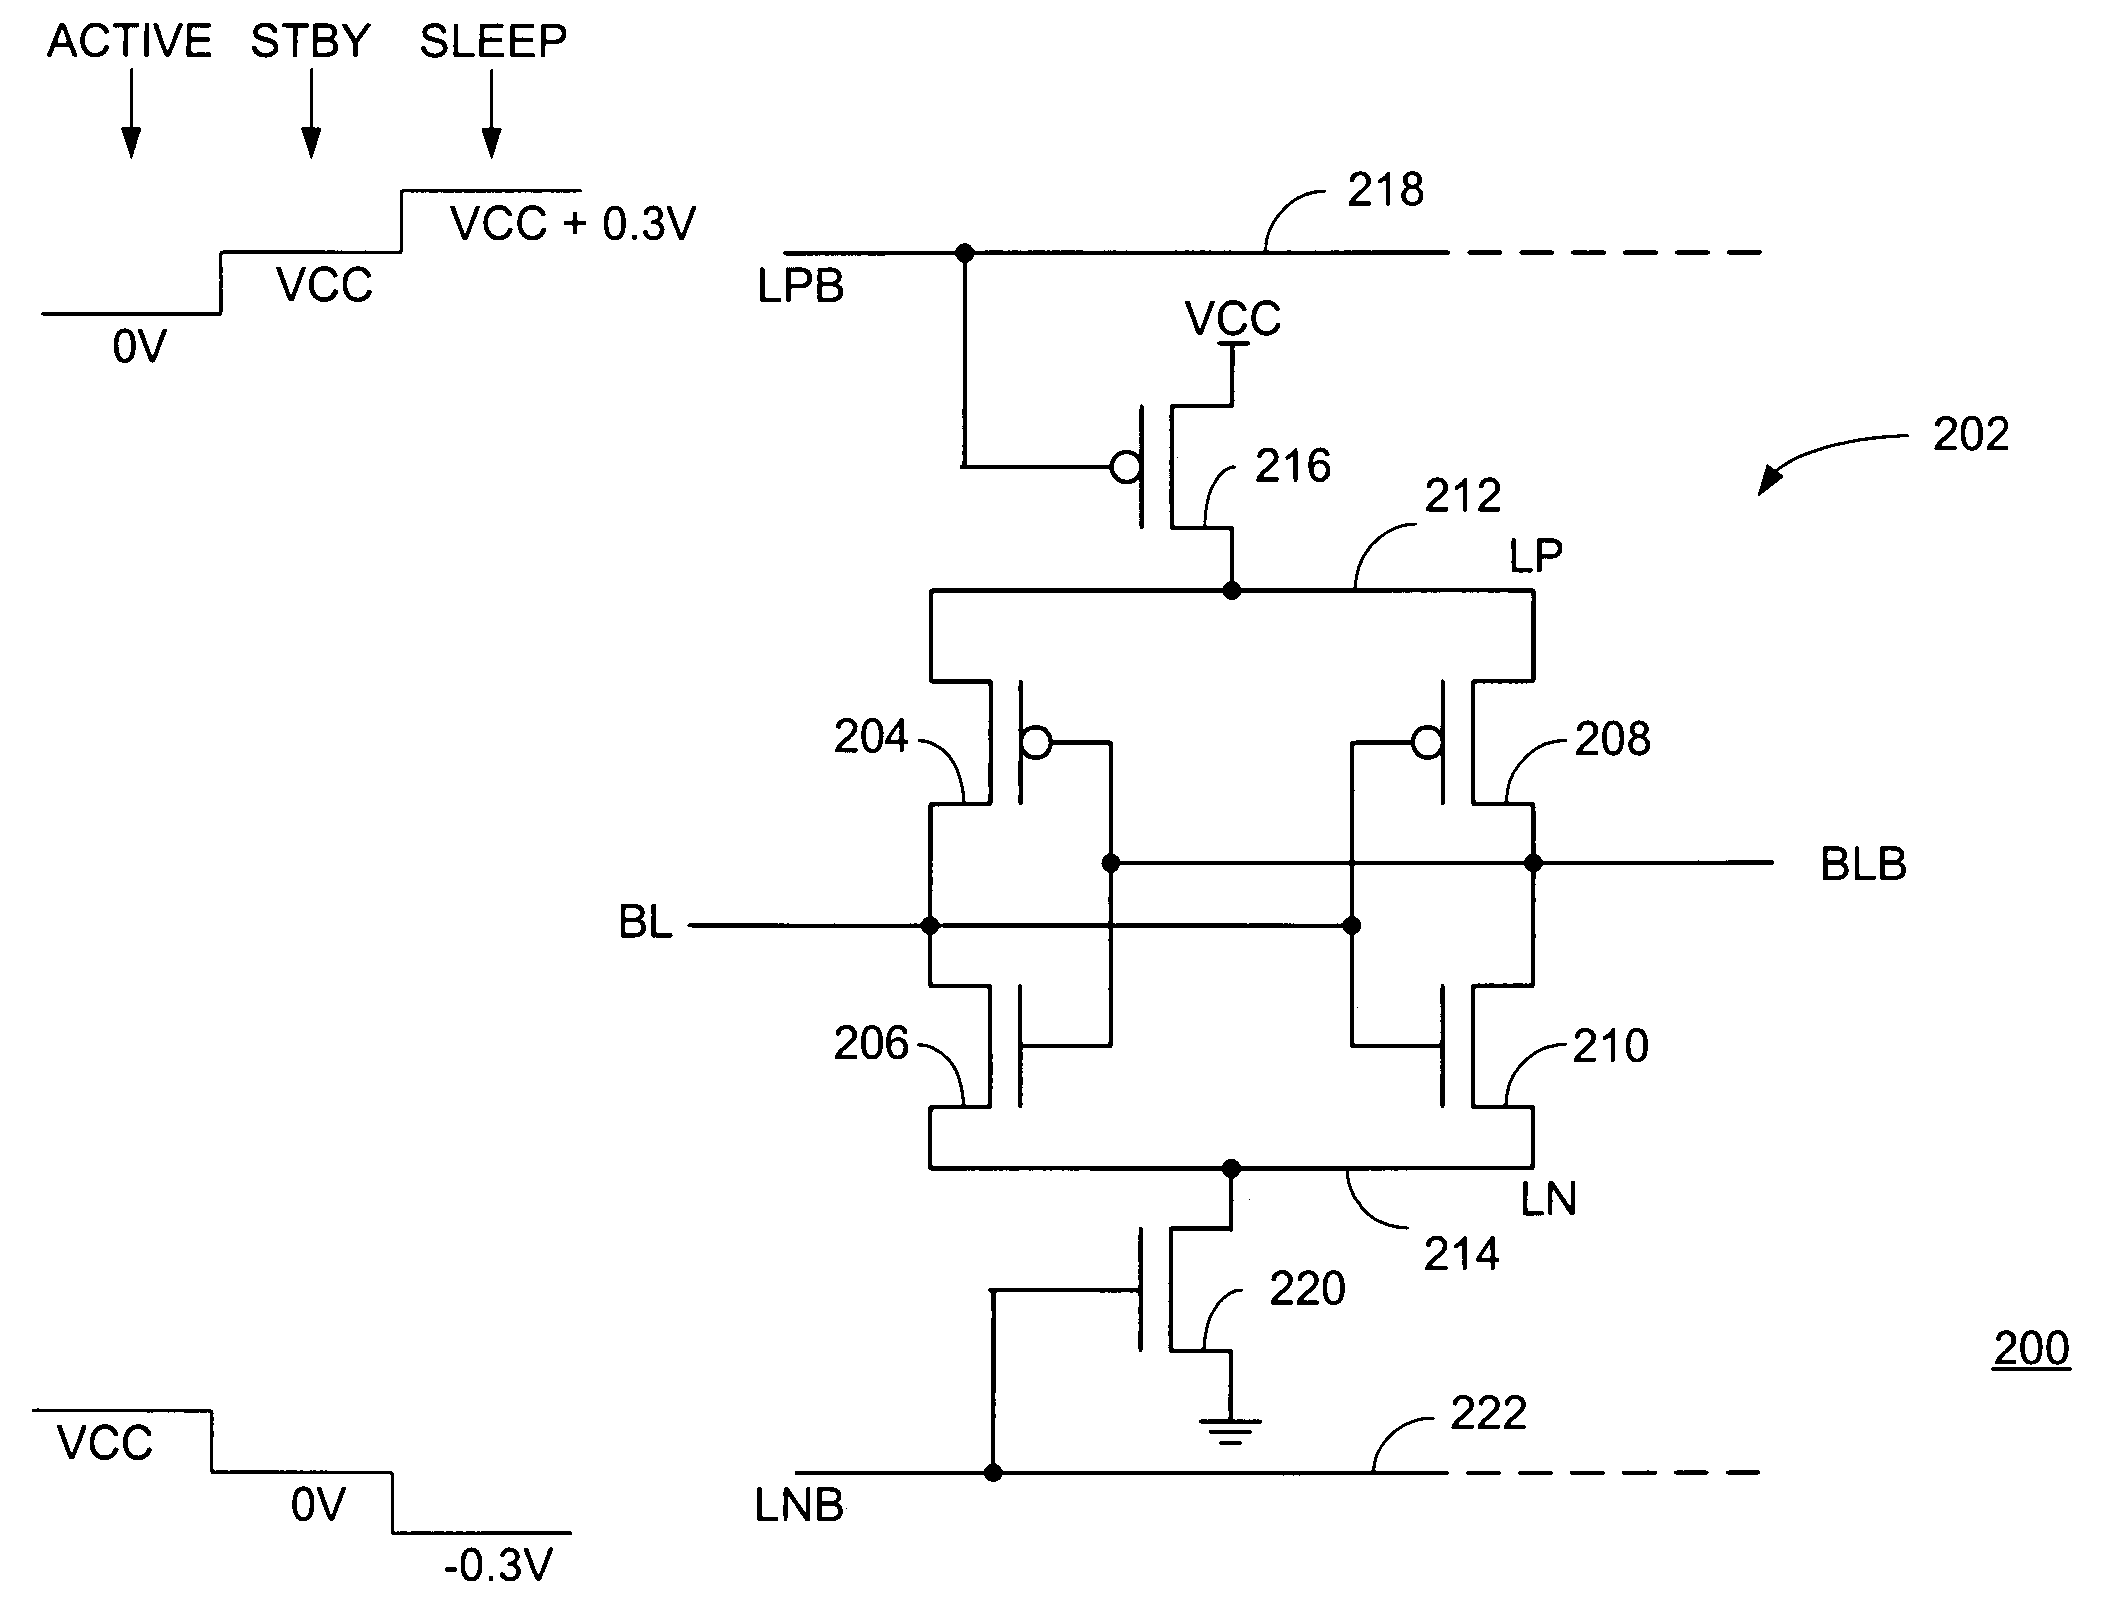 Sense amplifier power-gating technique for integrated circuit memory devices and those devices incorporating embedded dynamic random access memory (DRAM)